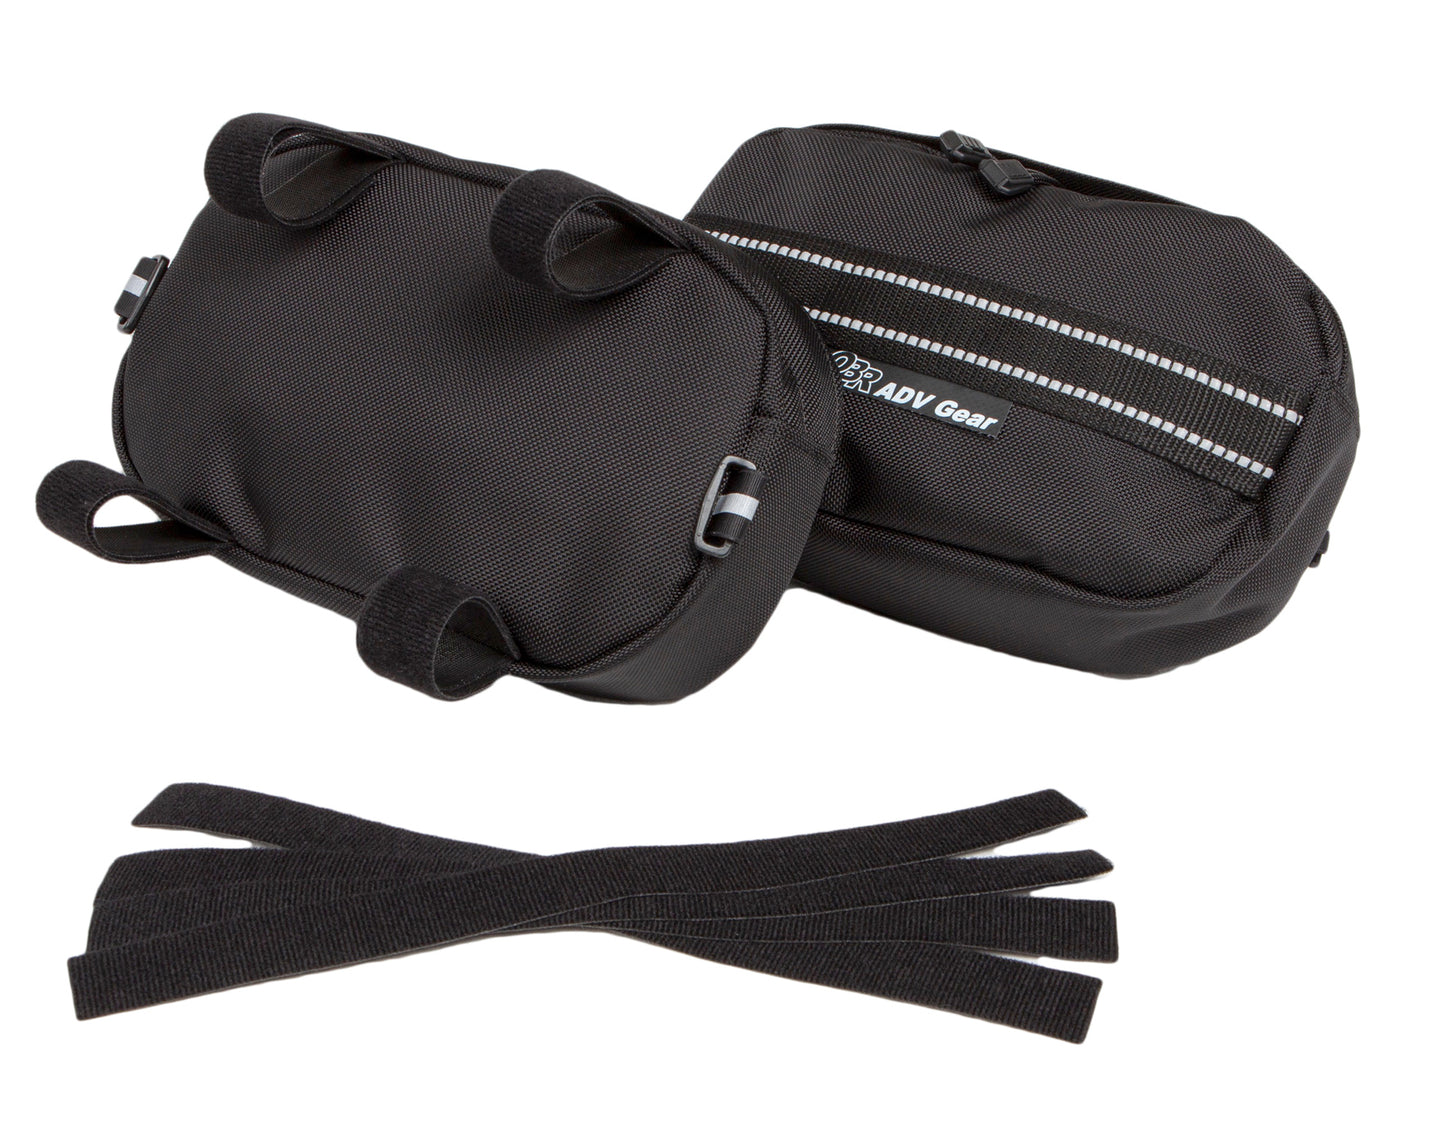 OBR ADV Gear Crash Bar Bags: mounting loops and straps